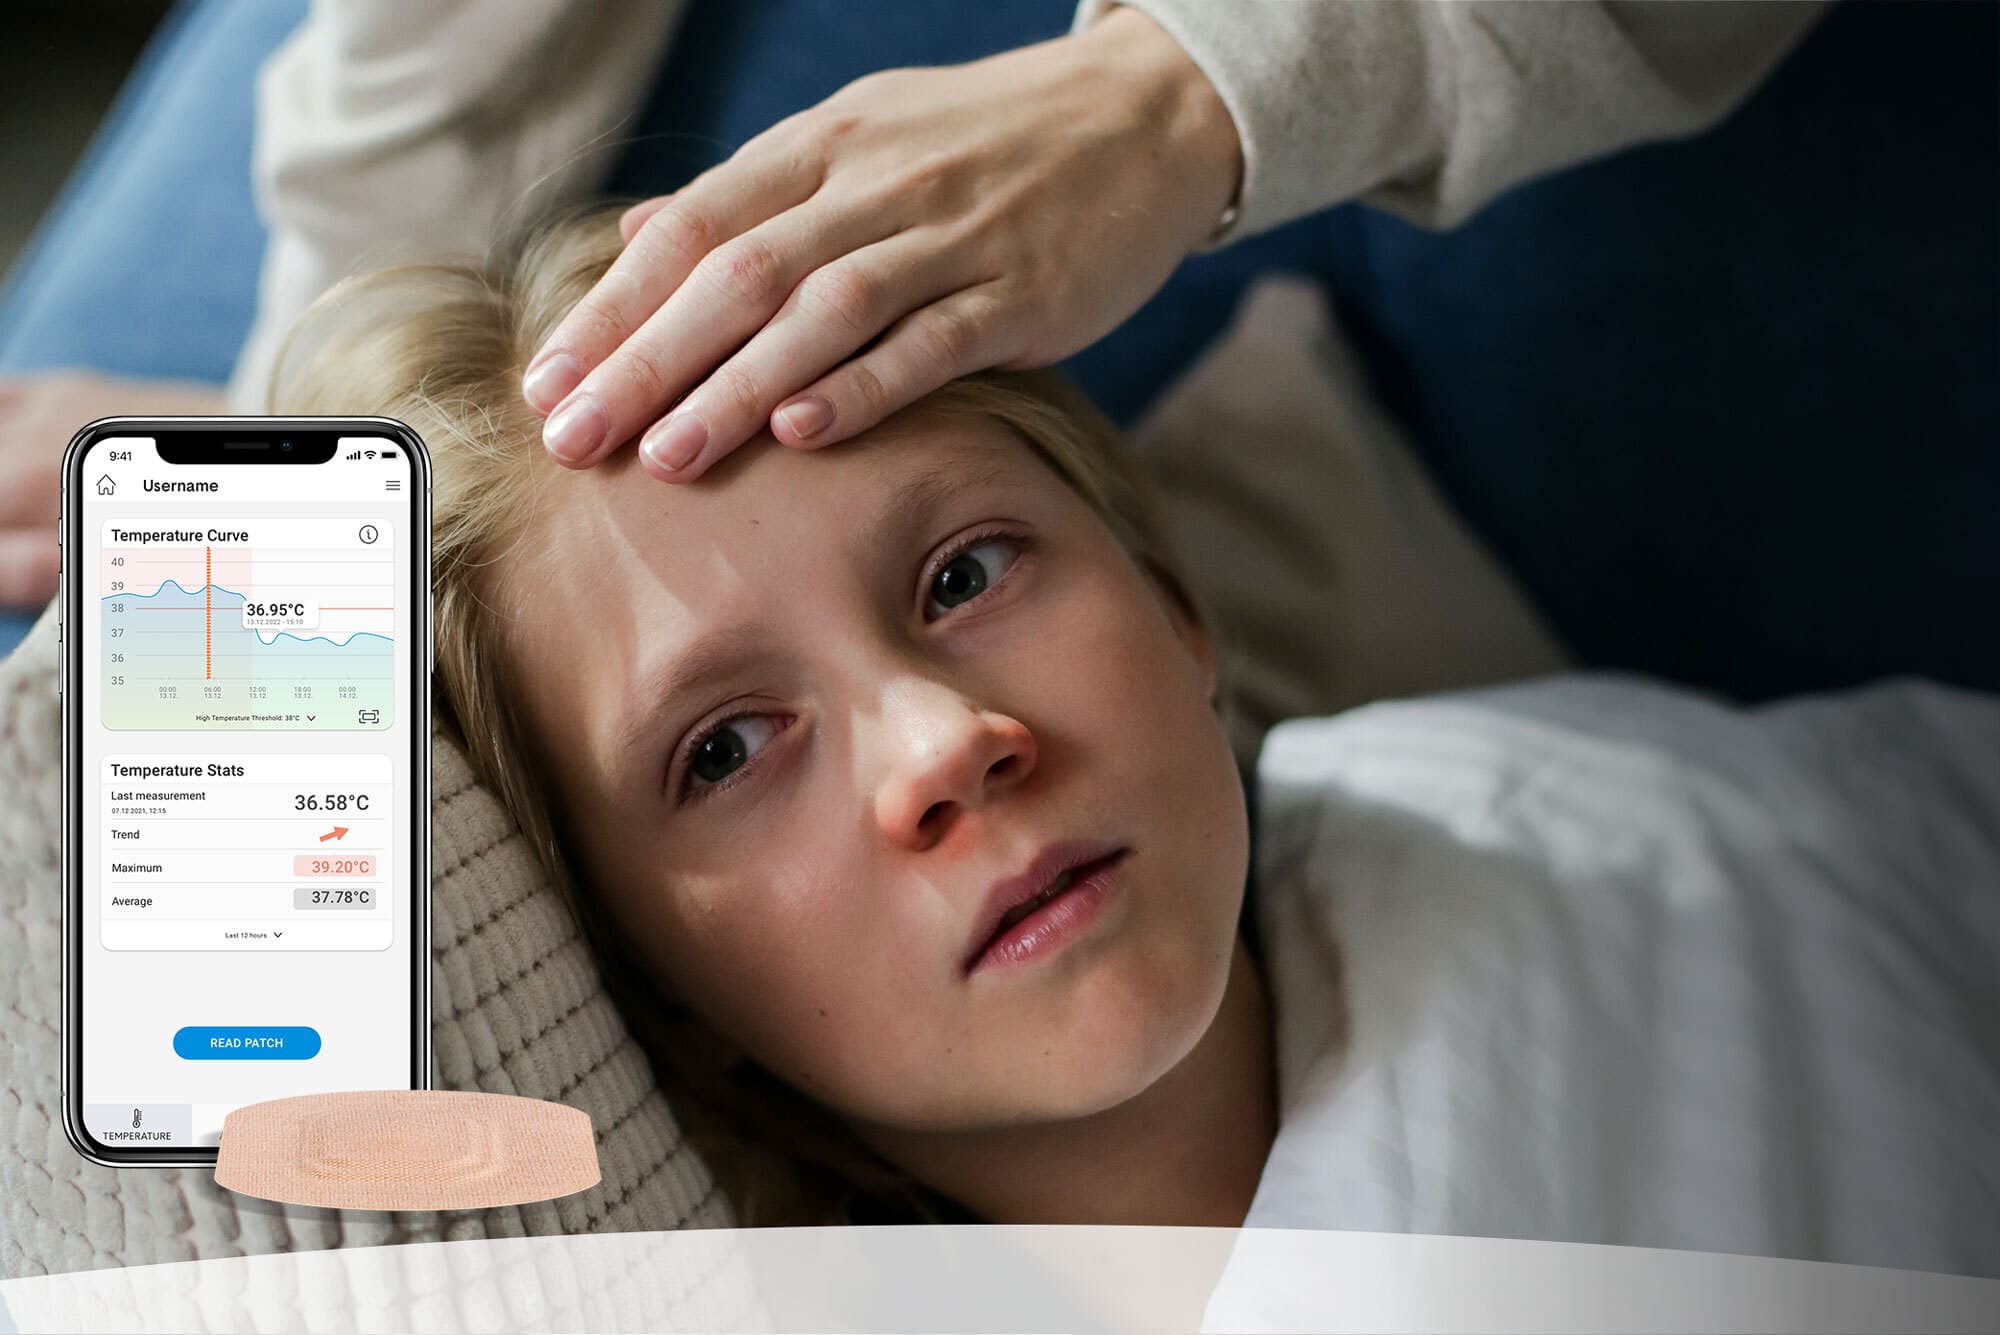 A sick young girl is lying in bed. Her mother`s hand is feeling her temperature on her forehead. An image of the STEADYTEMP® app screen and sensor patch are in the foreground.